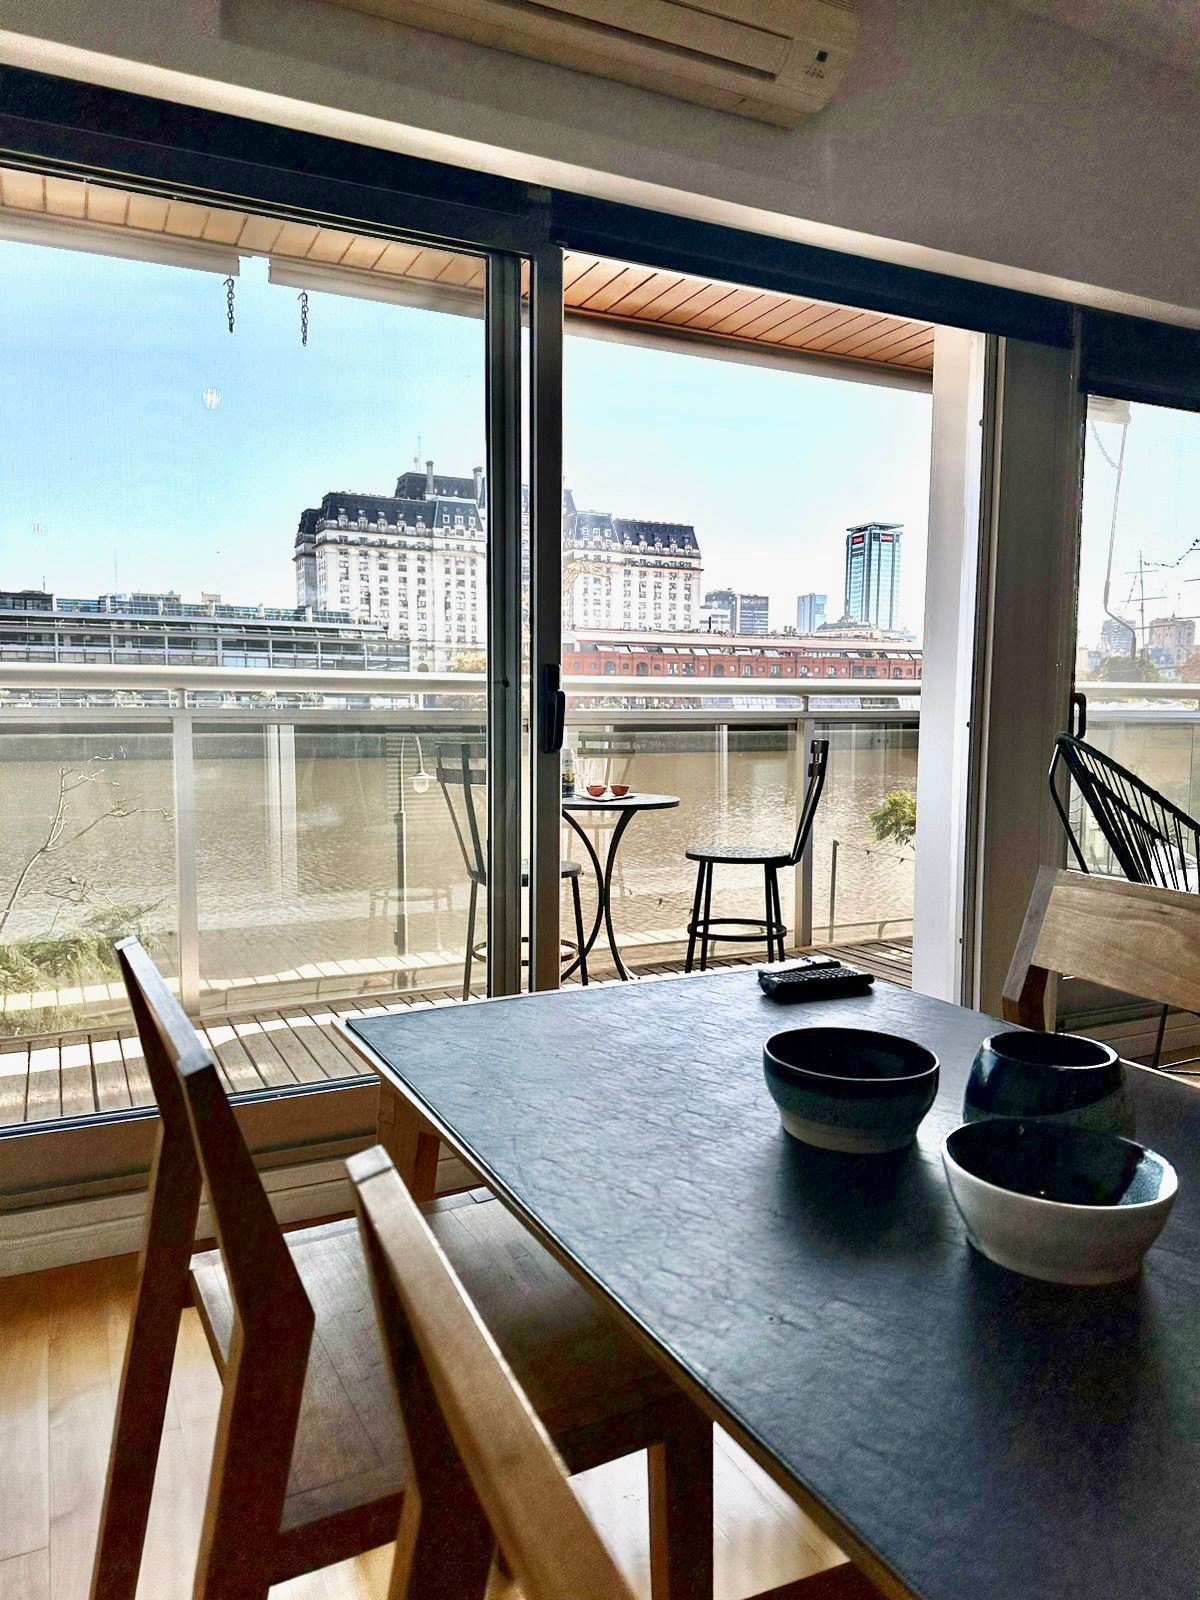 Exclusive apartment on the dock in Puerto Madero